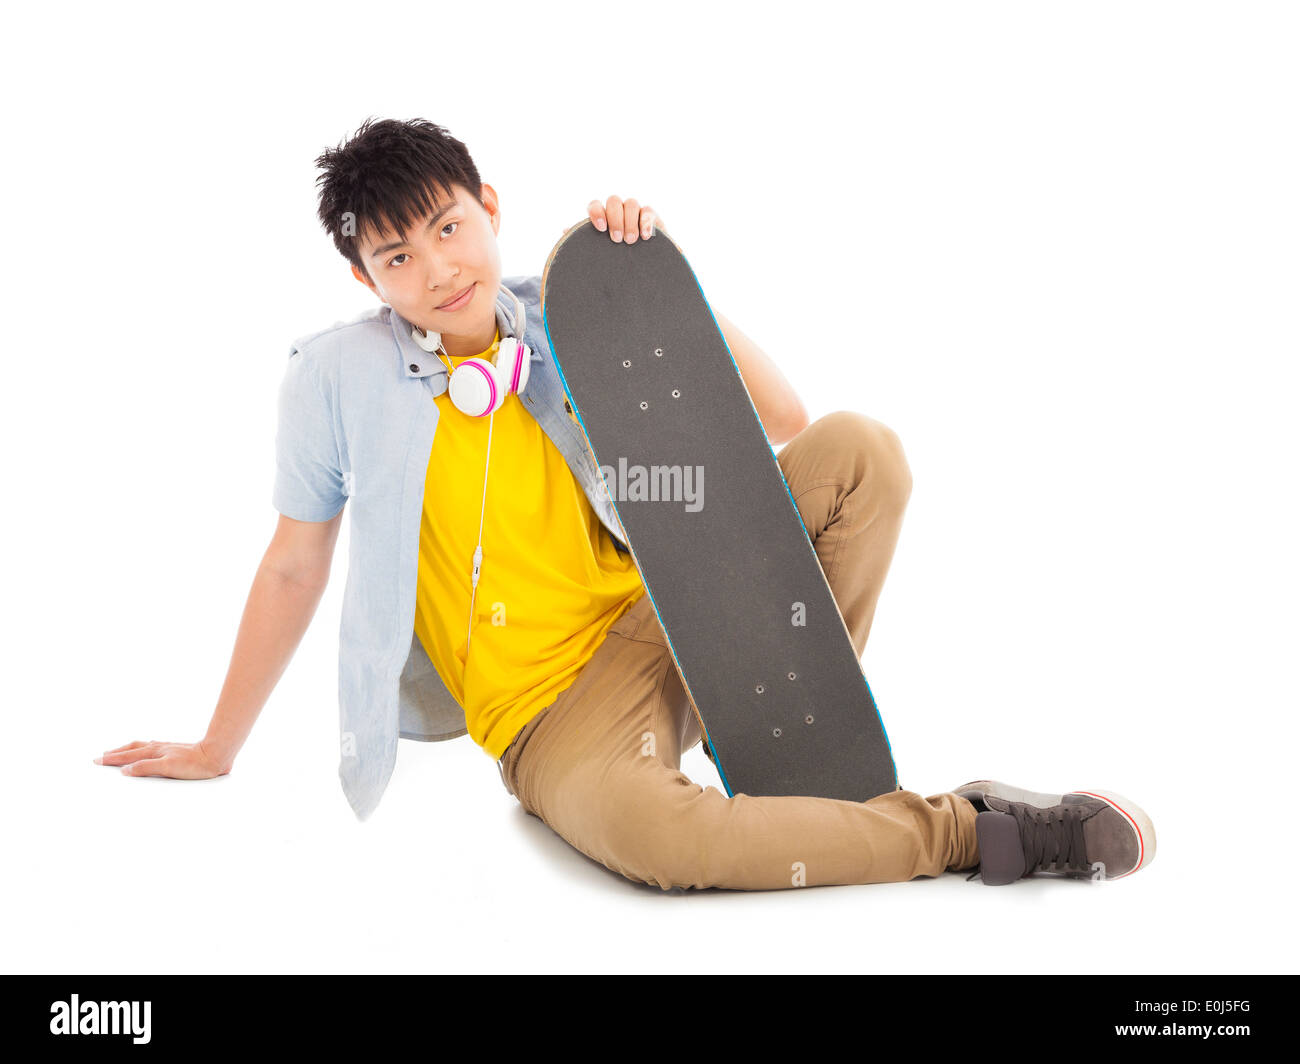 Cool man sitting and holding a skateboard Banque D'Images